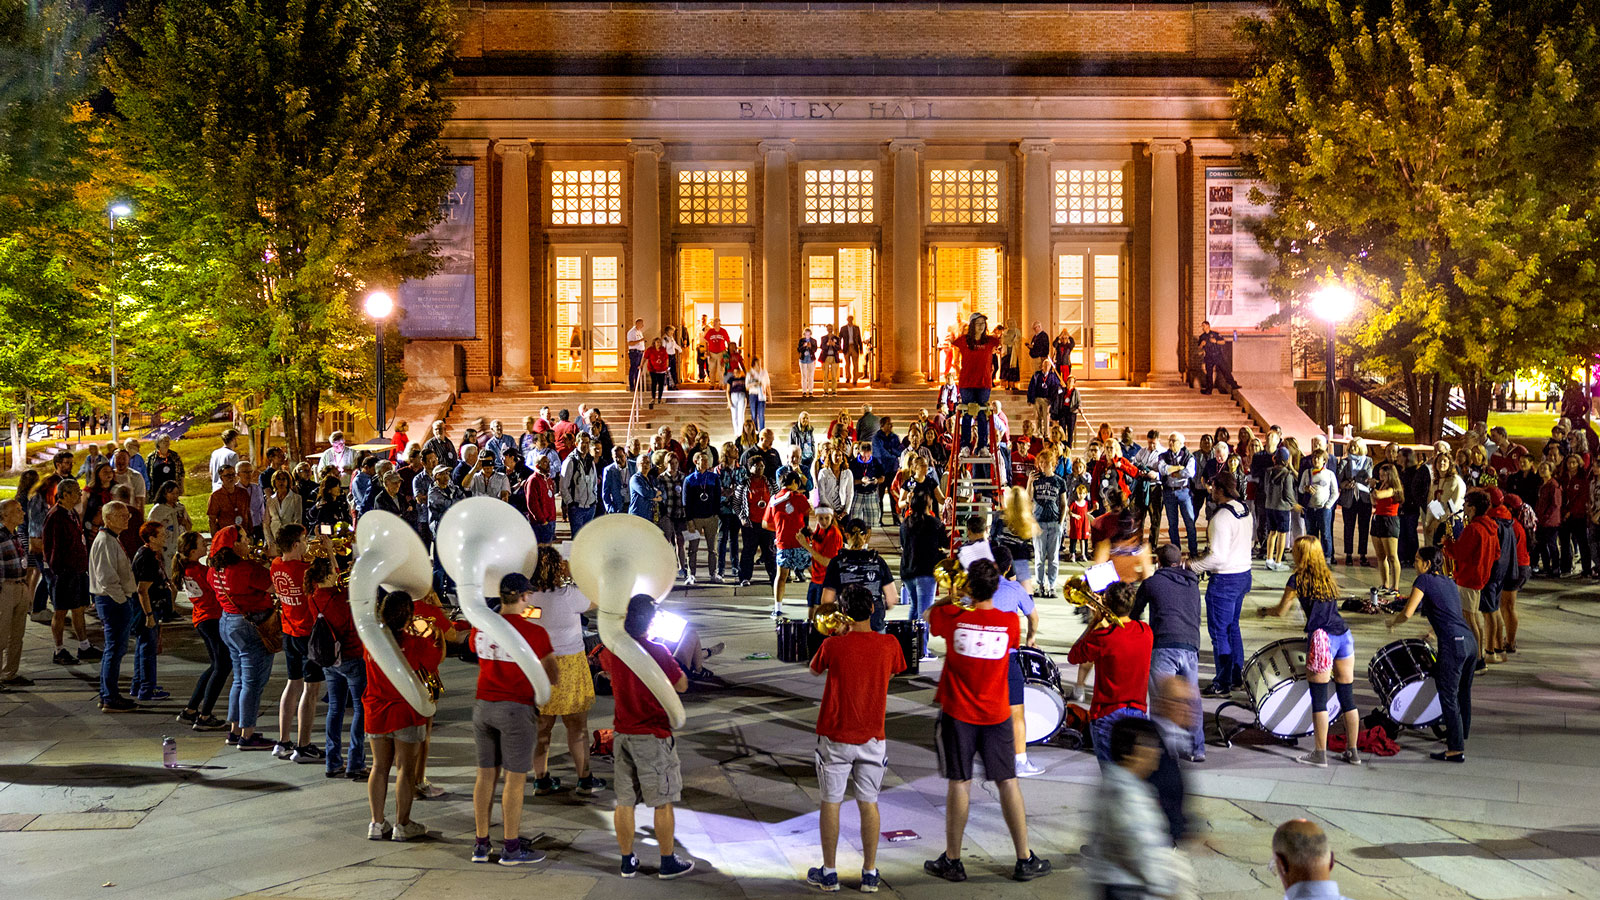 Members of the Big Red band play outside Bailey Hall during Reunion 2024